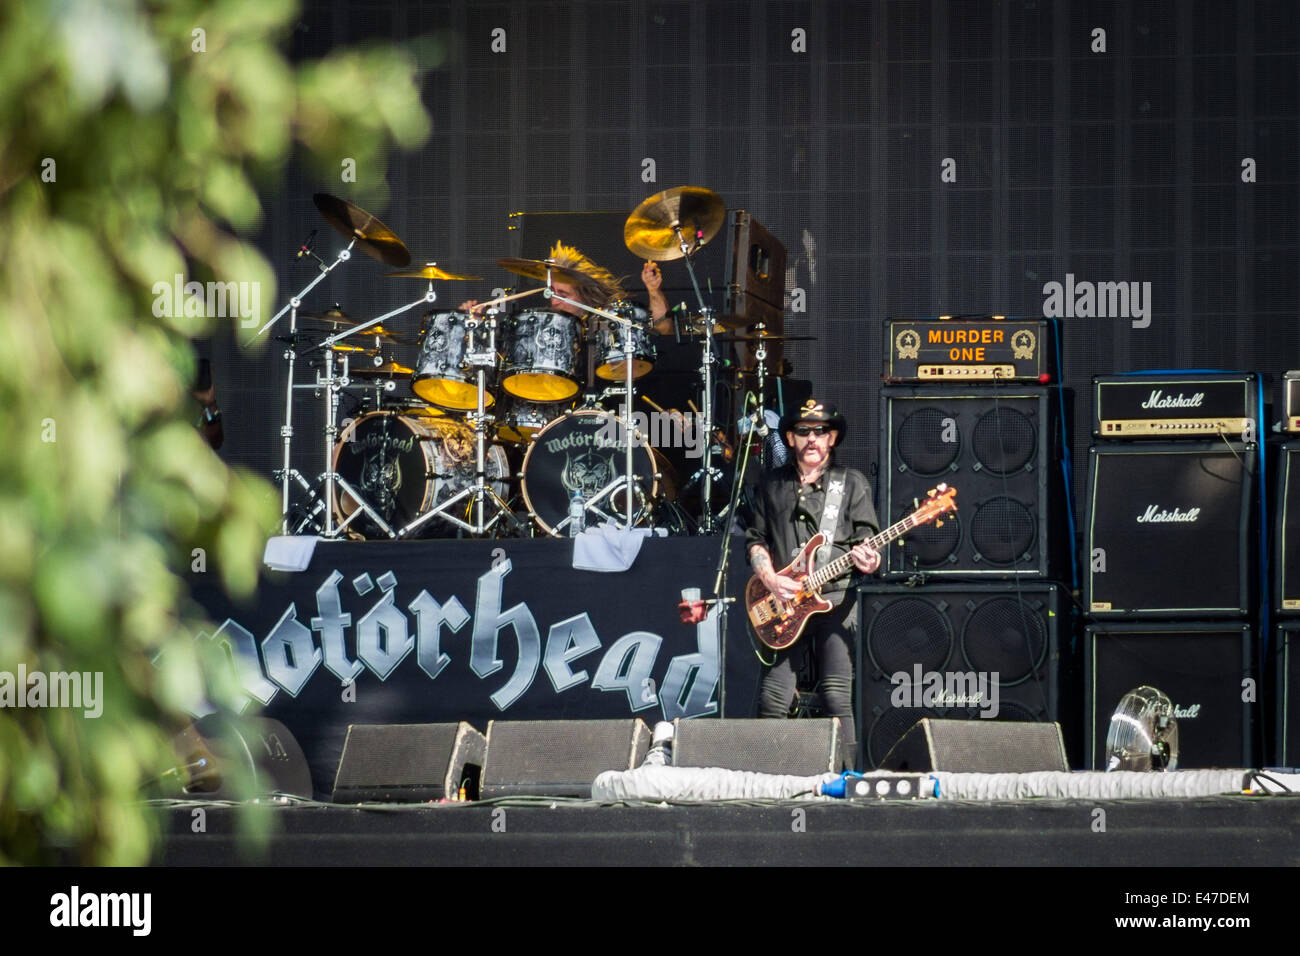 London, UK. 04th July, 2014. Motorhead play the main stage at the Barclaycard British Summer Time festival in London's Hyde Park Credit:  Guy Corbishley/Alamy Live News Stock Photo